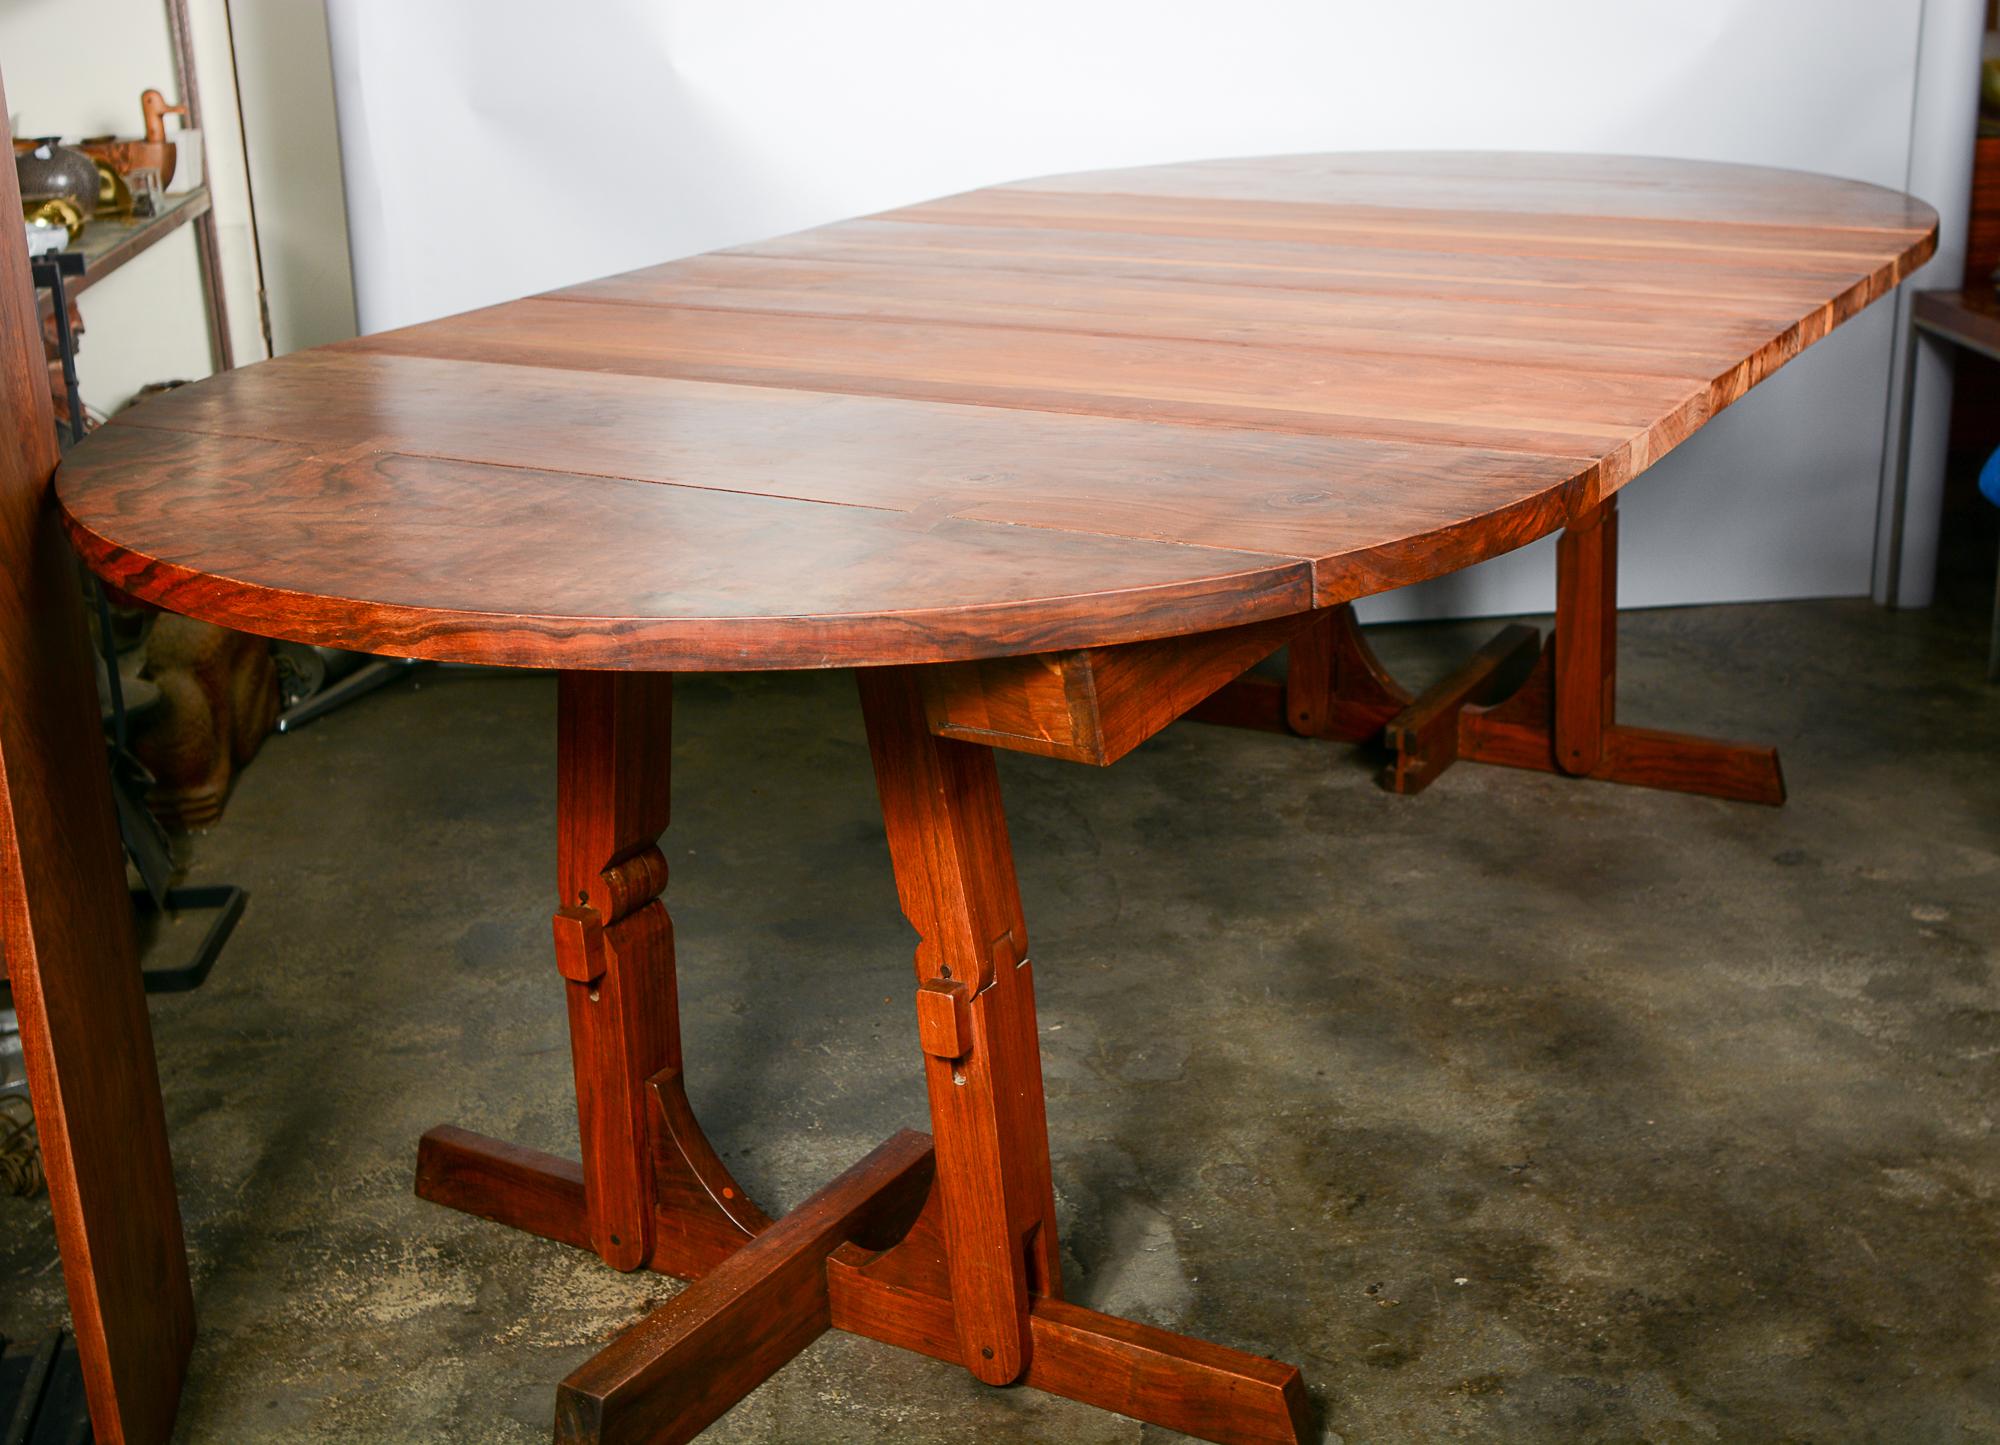 Walnut Dining Table with Four Leaves by Designer and Craftsman Morris Sheppard For Sale 4